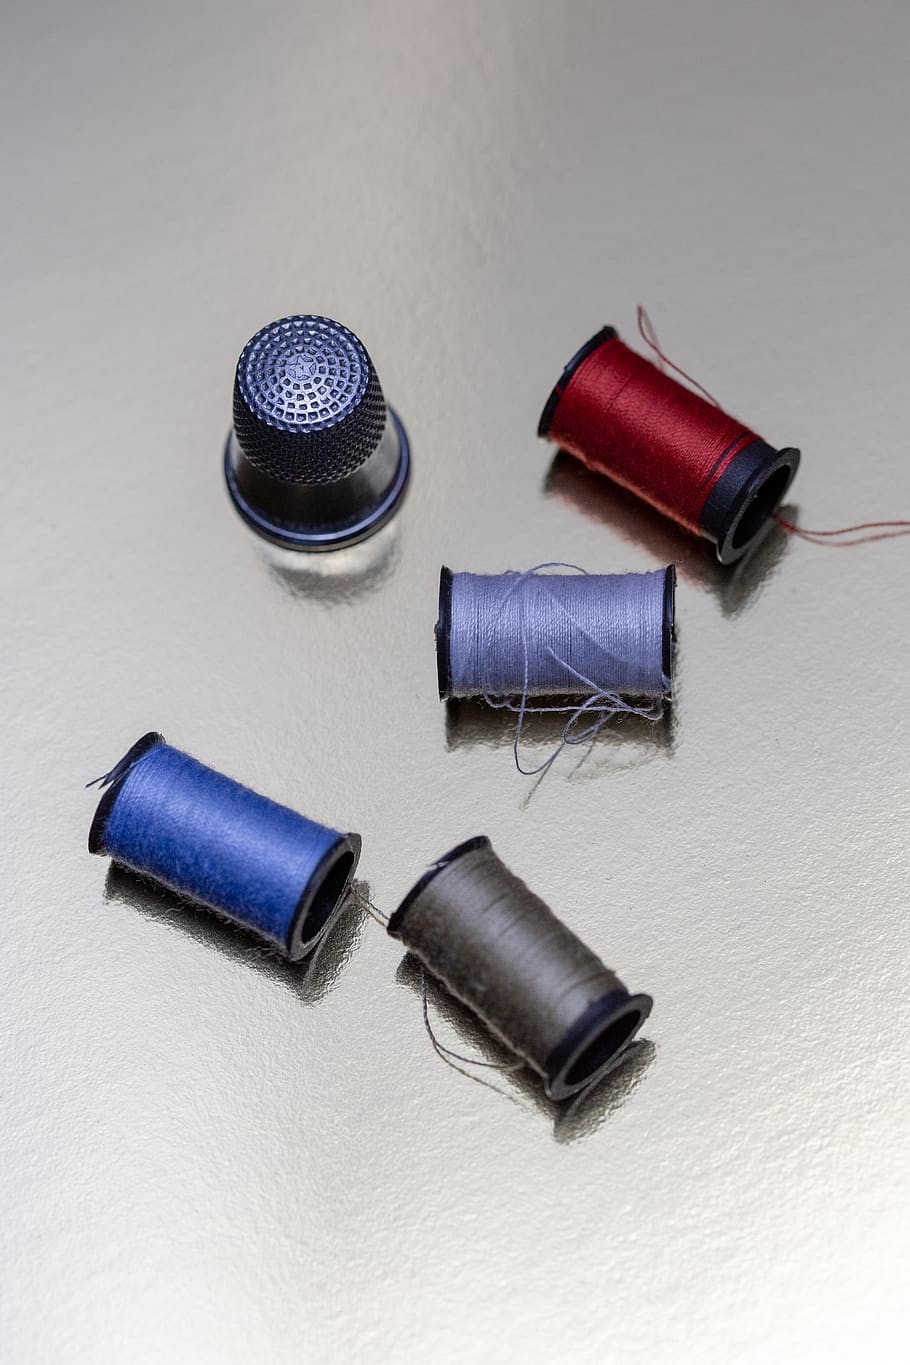 sewing, thread, thimble, spools, stitching, threads, background, crafts, diy, cotton